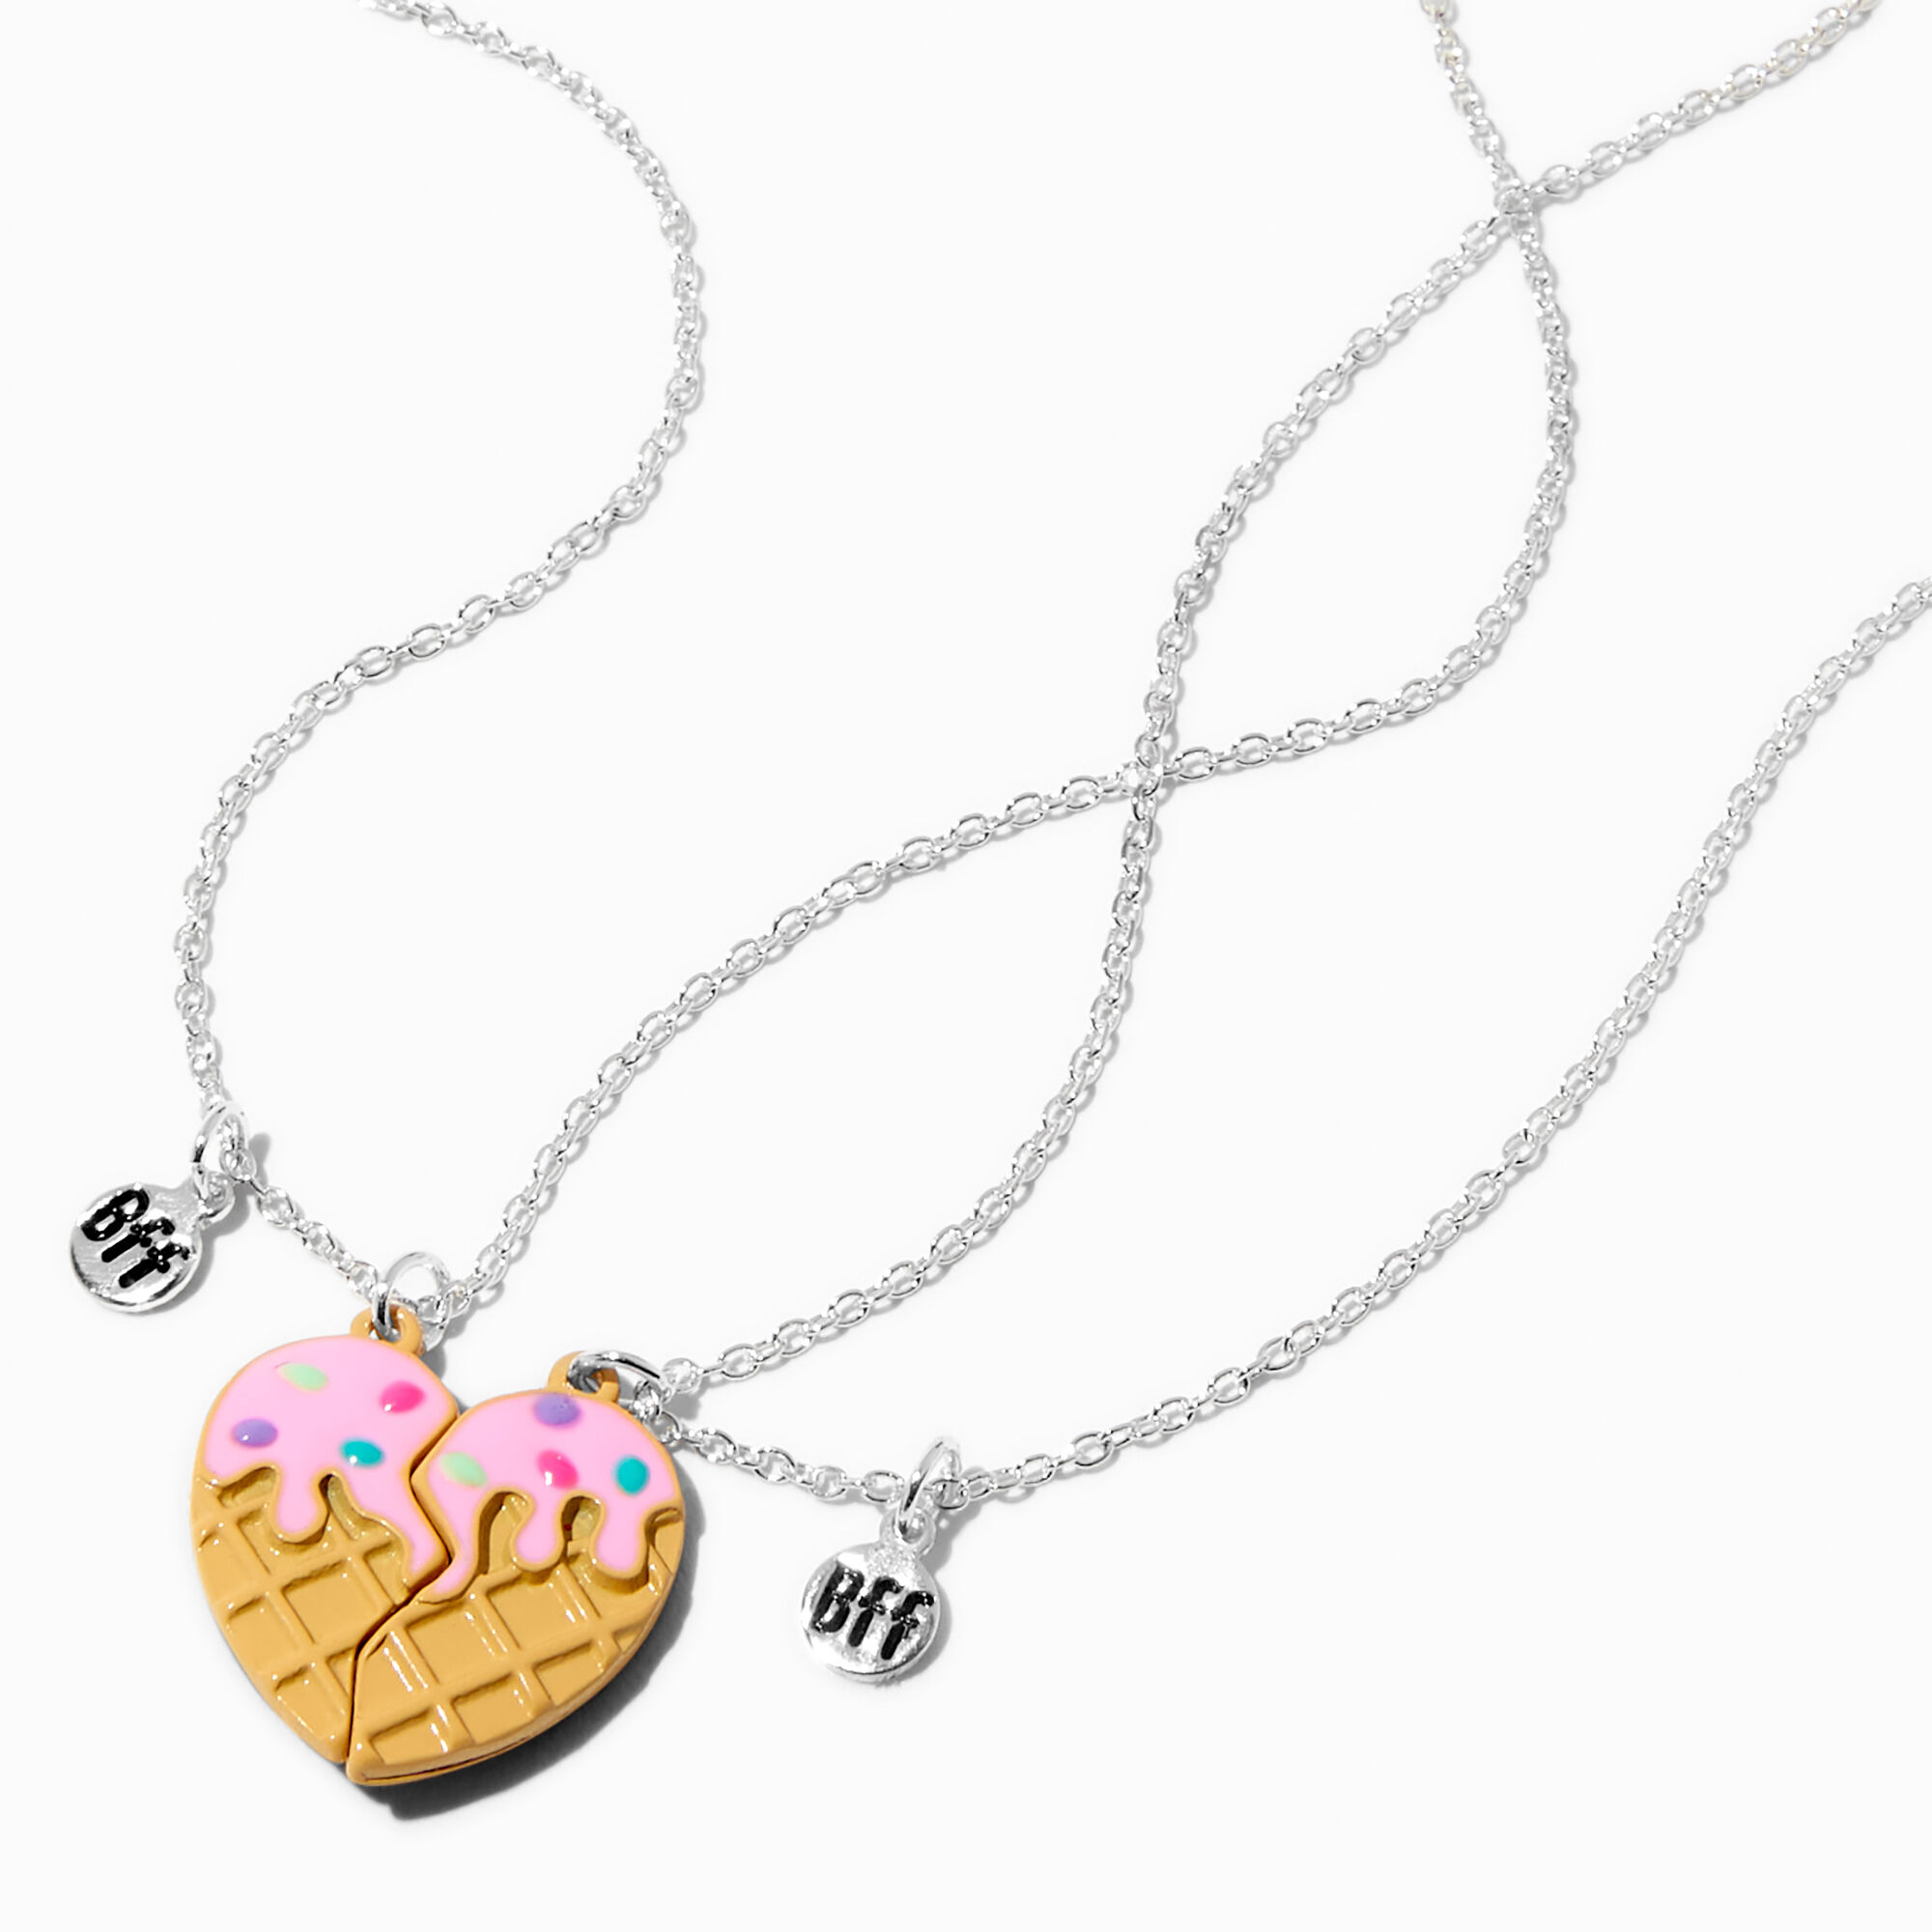 Claire's Wednesday™ Best Friends Pendant Necklace - 2 Pack